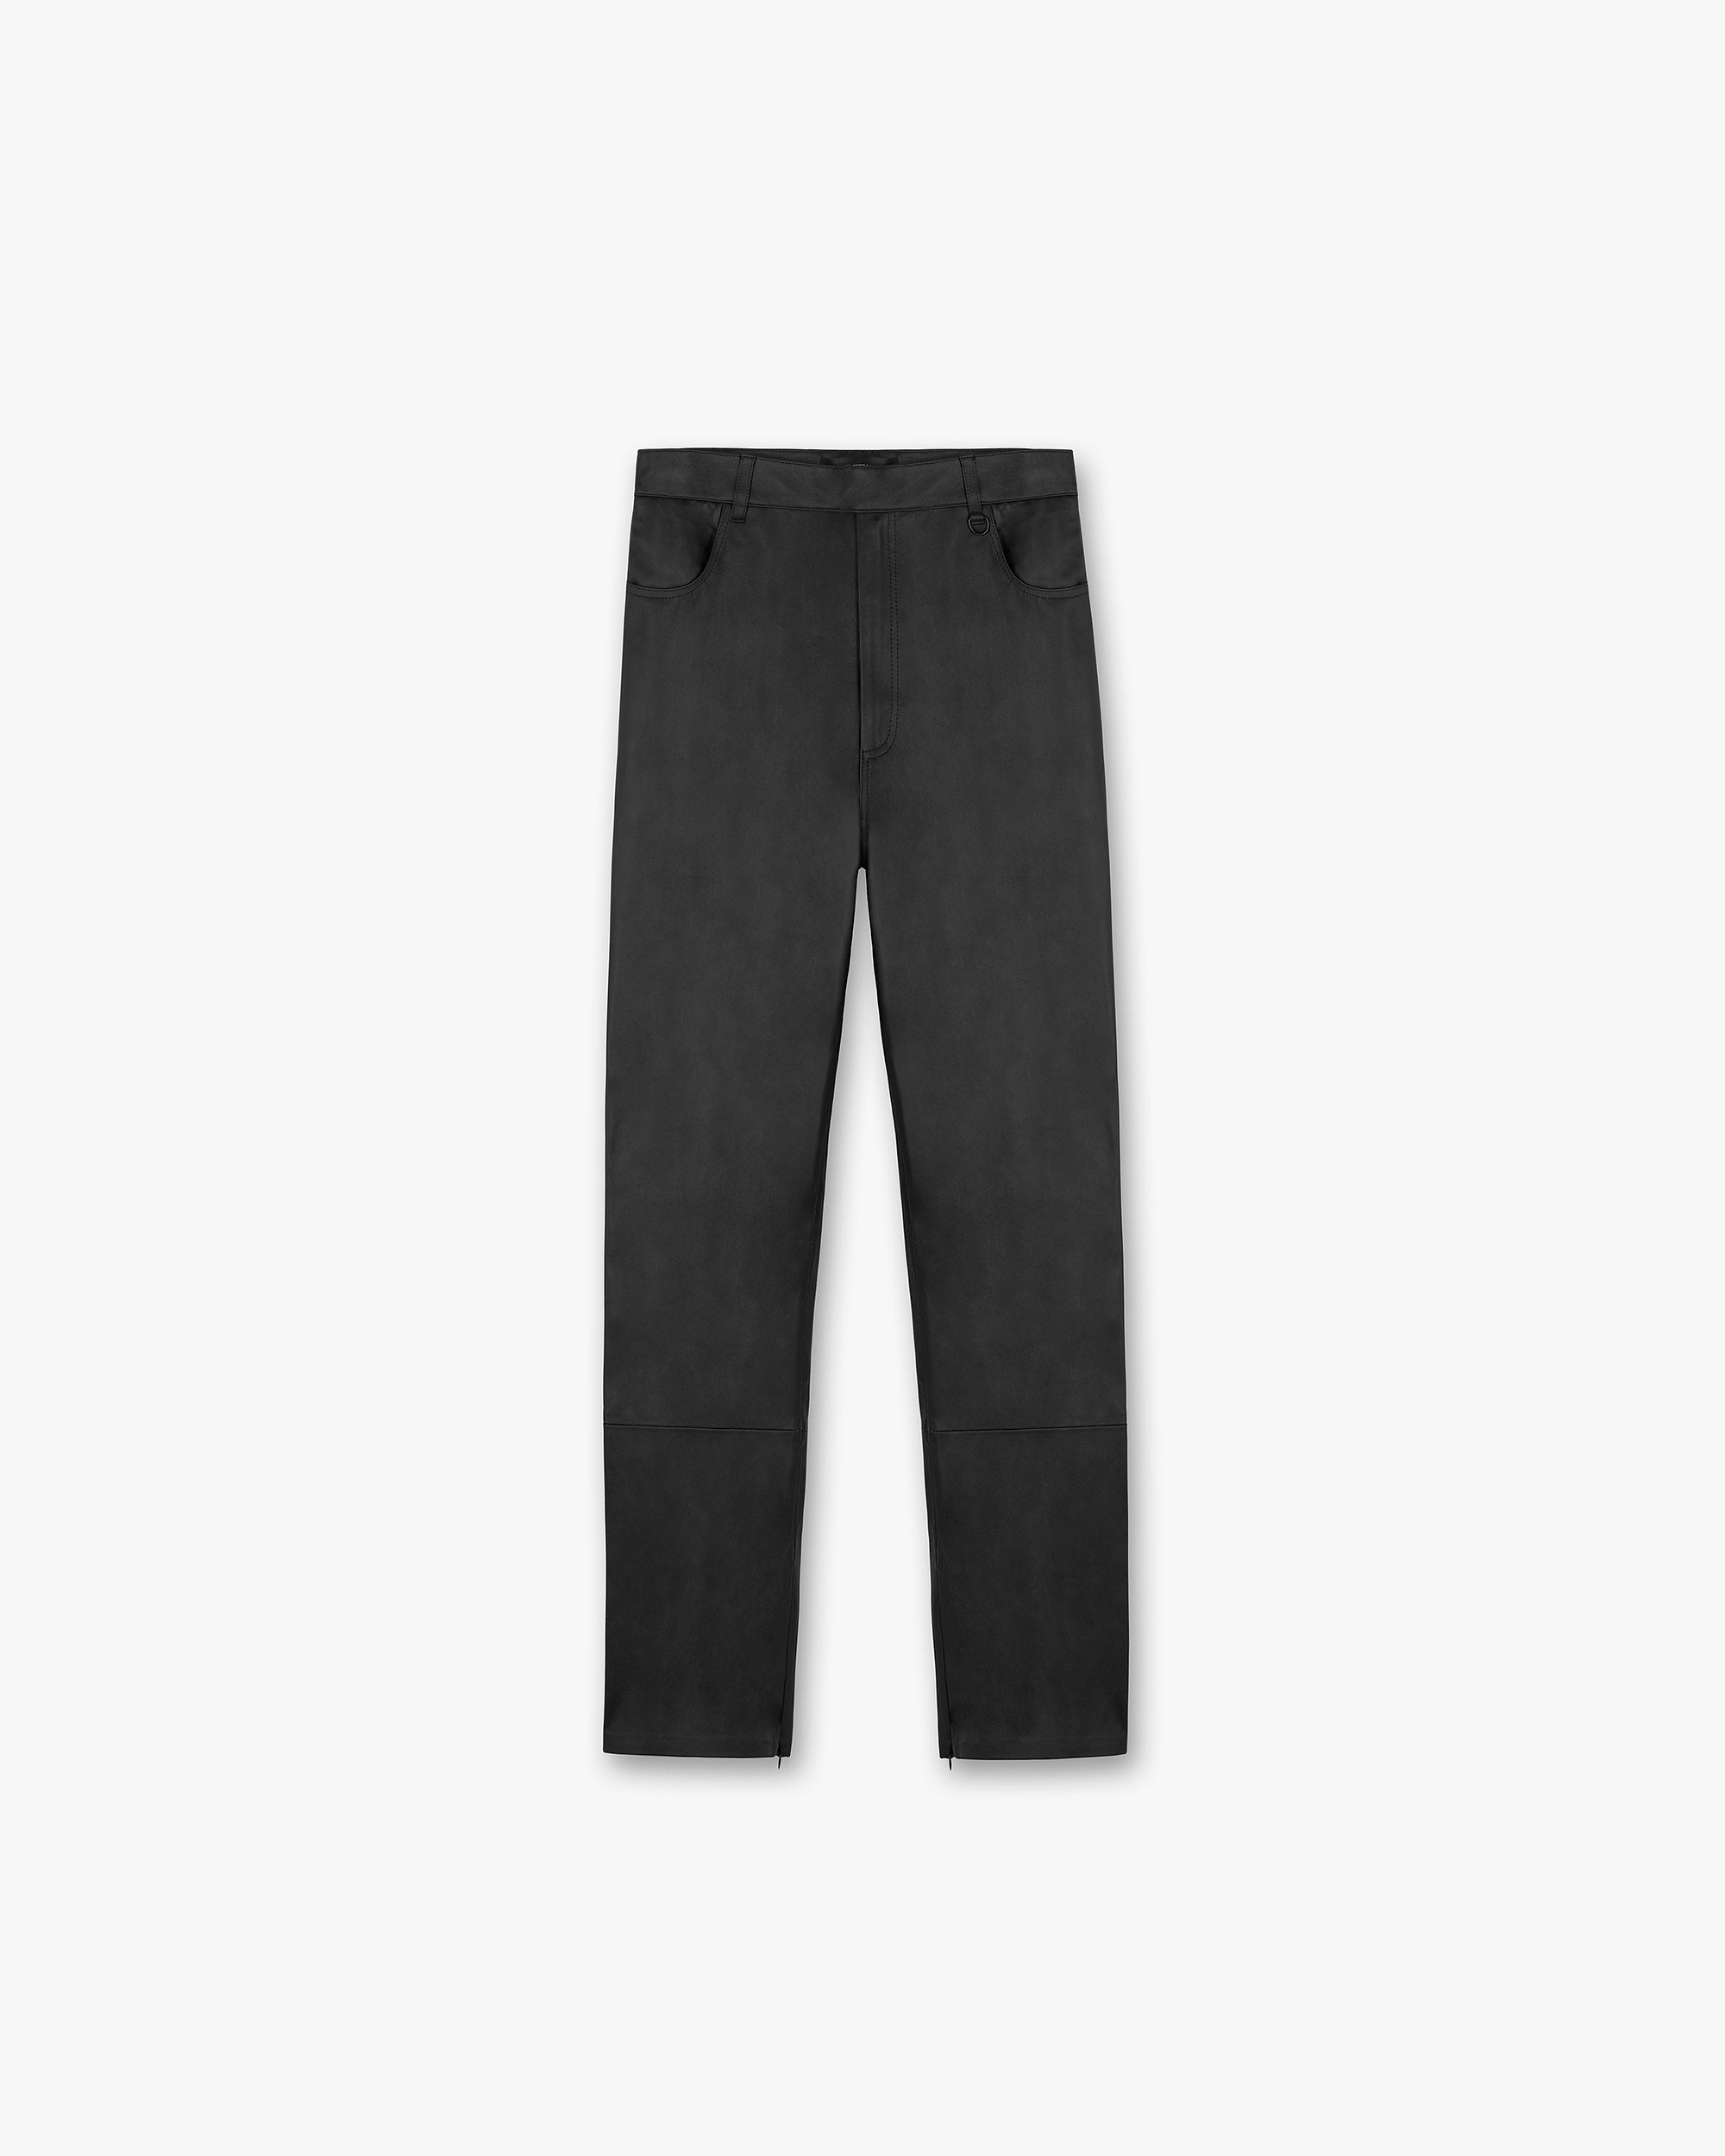 Leather Tailored Pant | Black Pants FW22 | Represent Clo